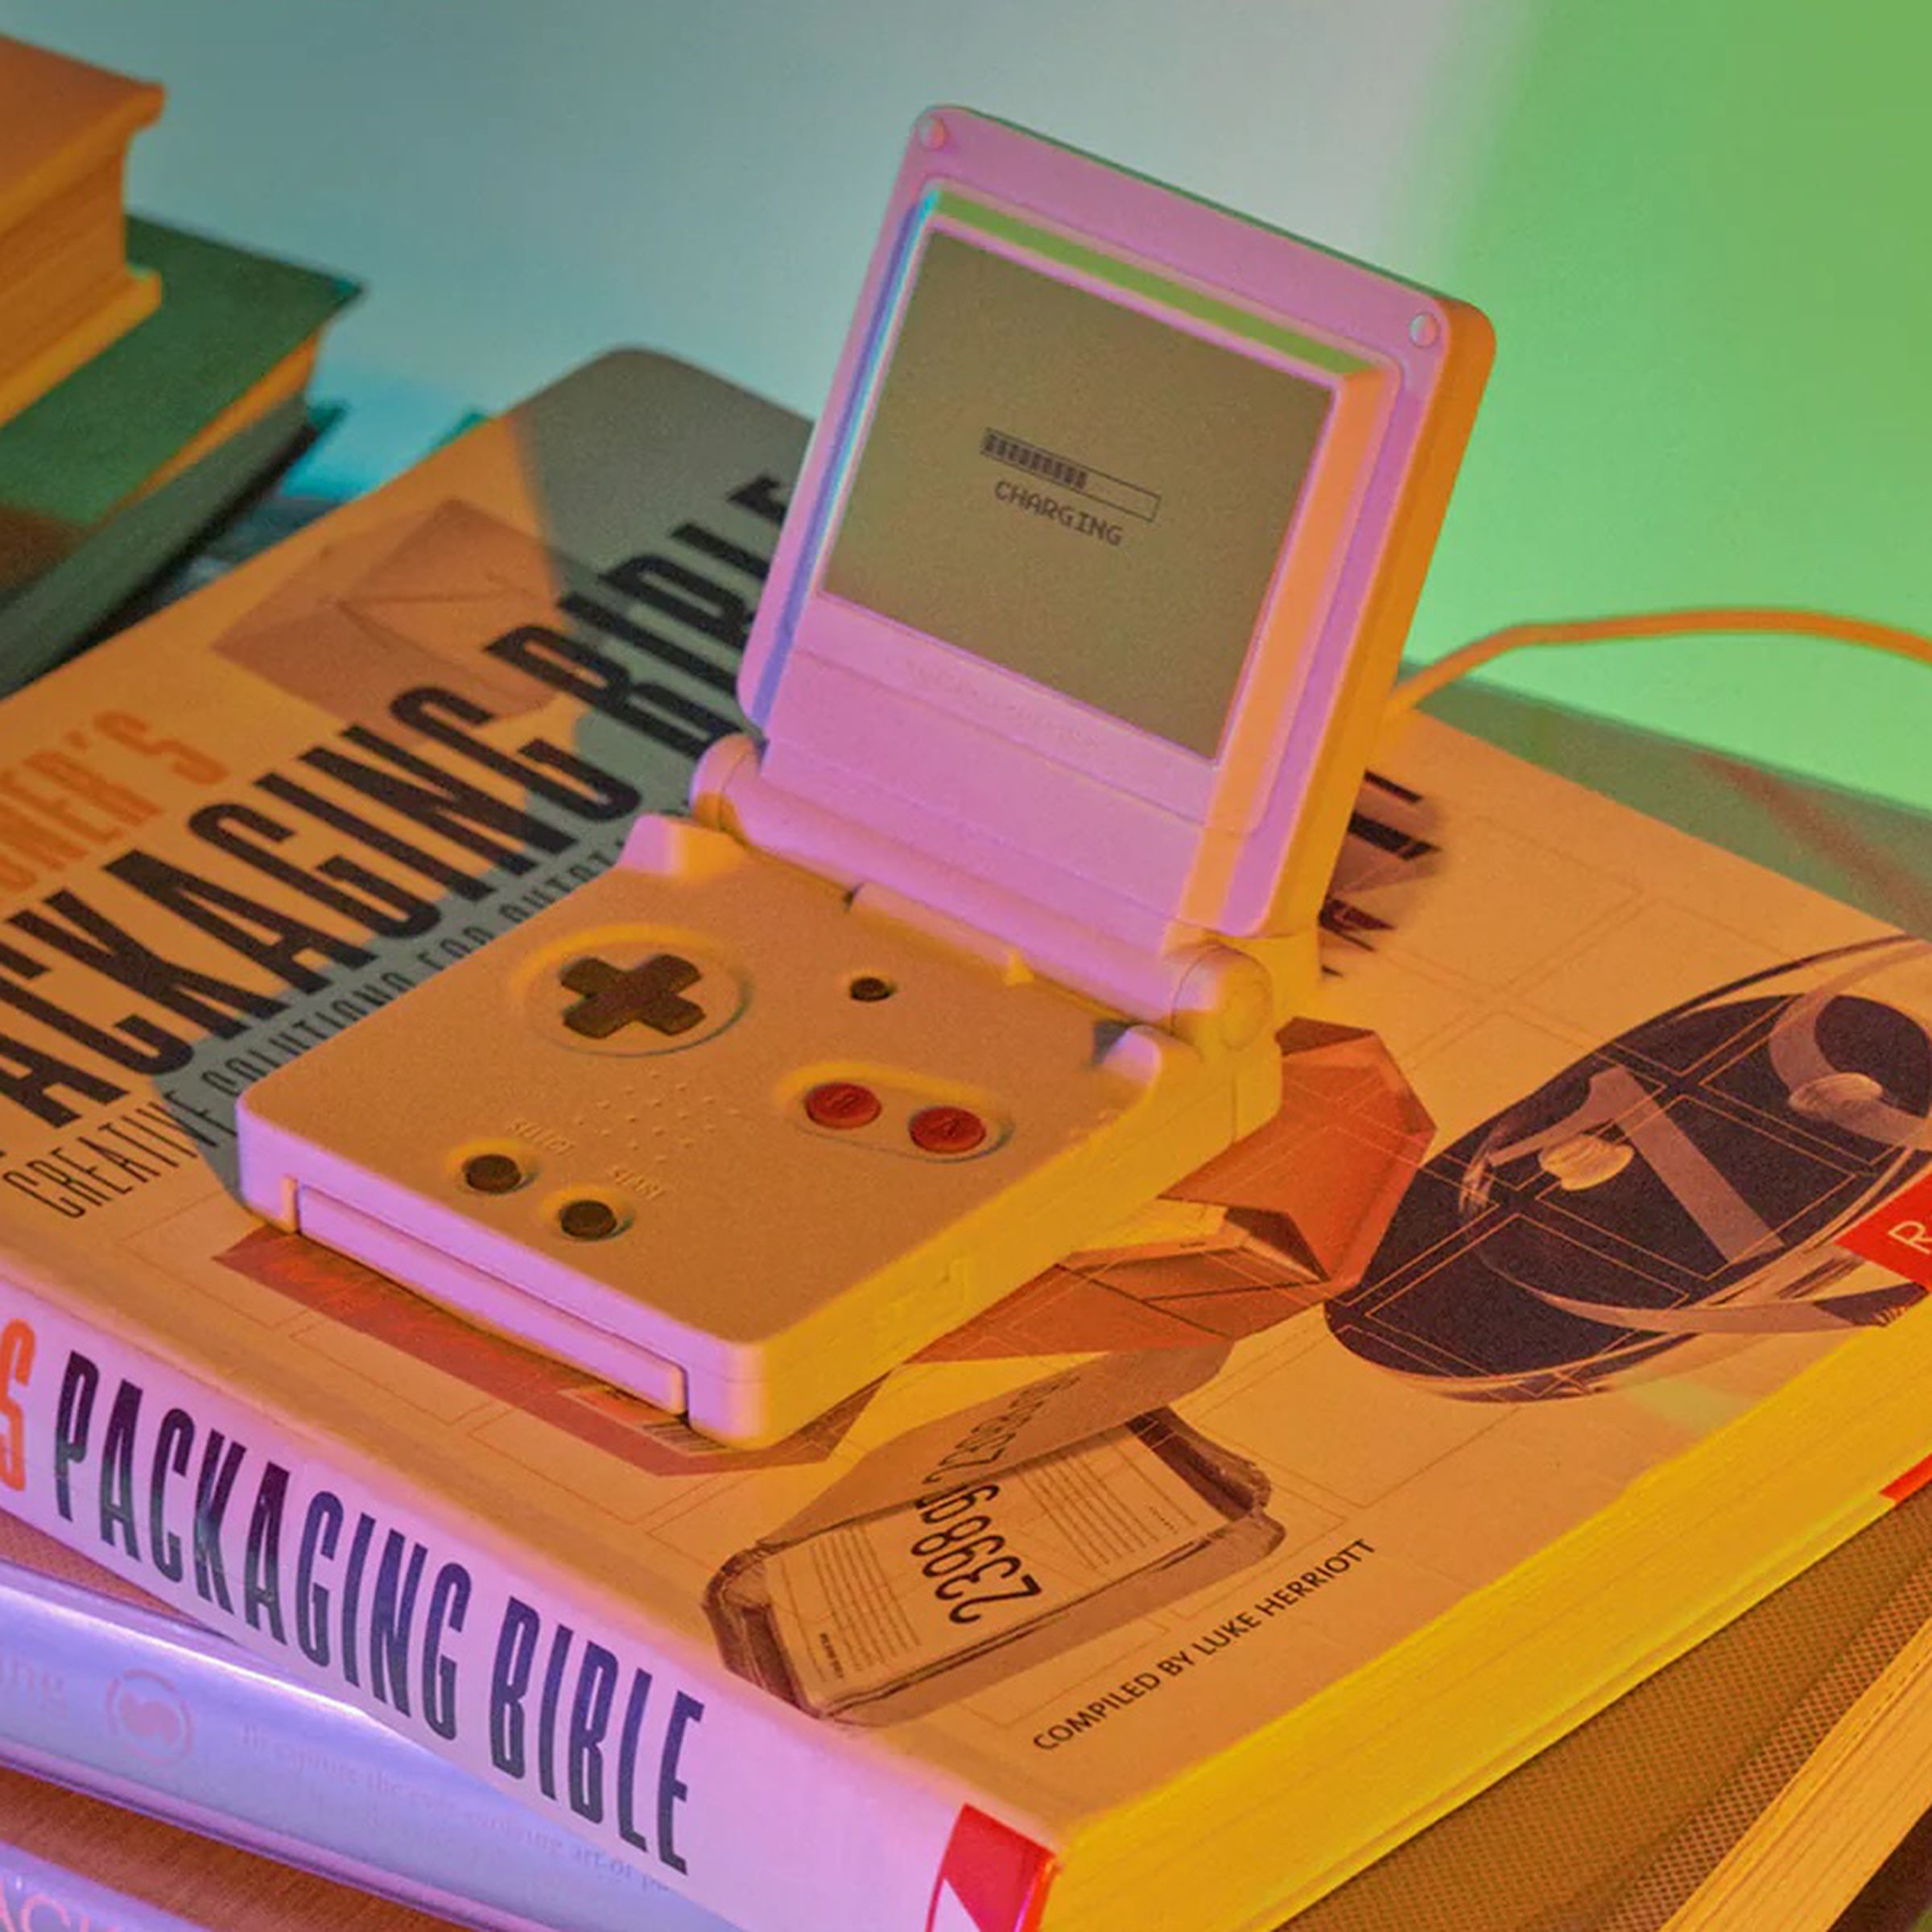 An image of a charger resembling a GameBoy SP on a stack of books.